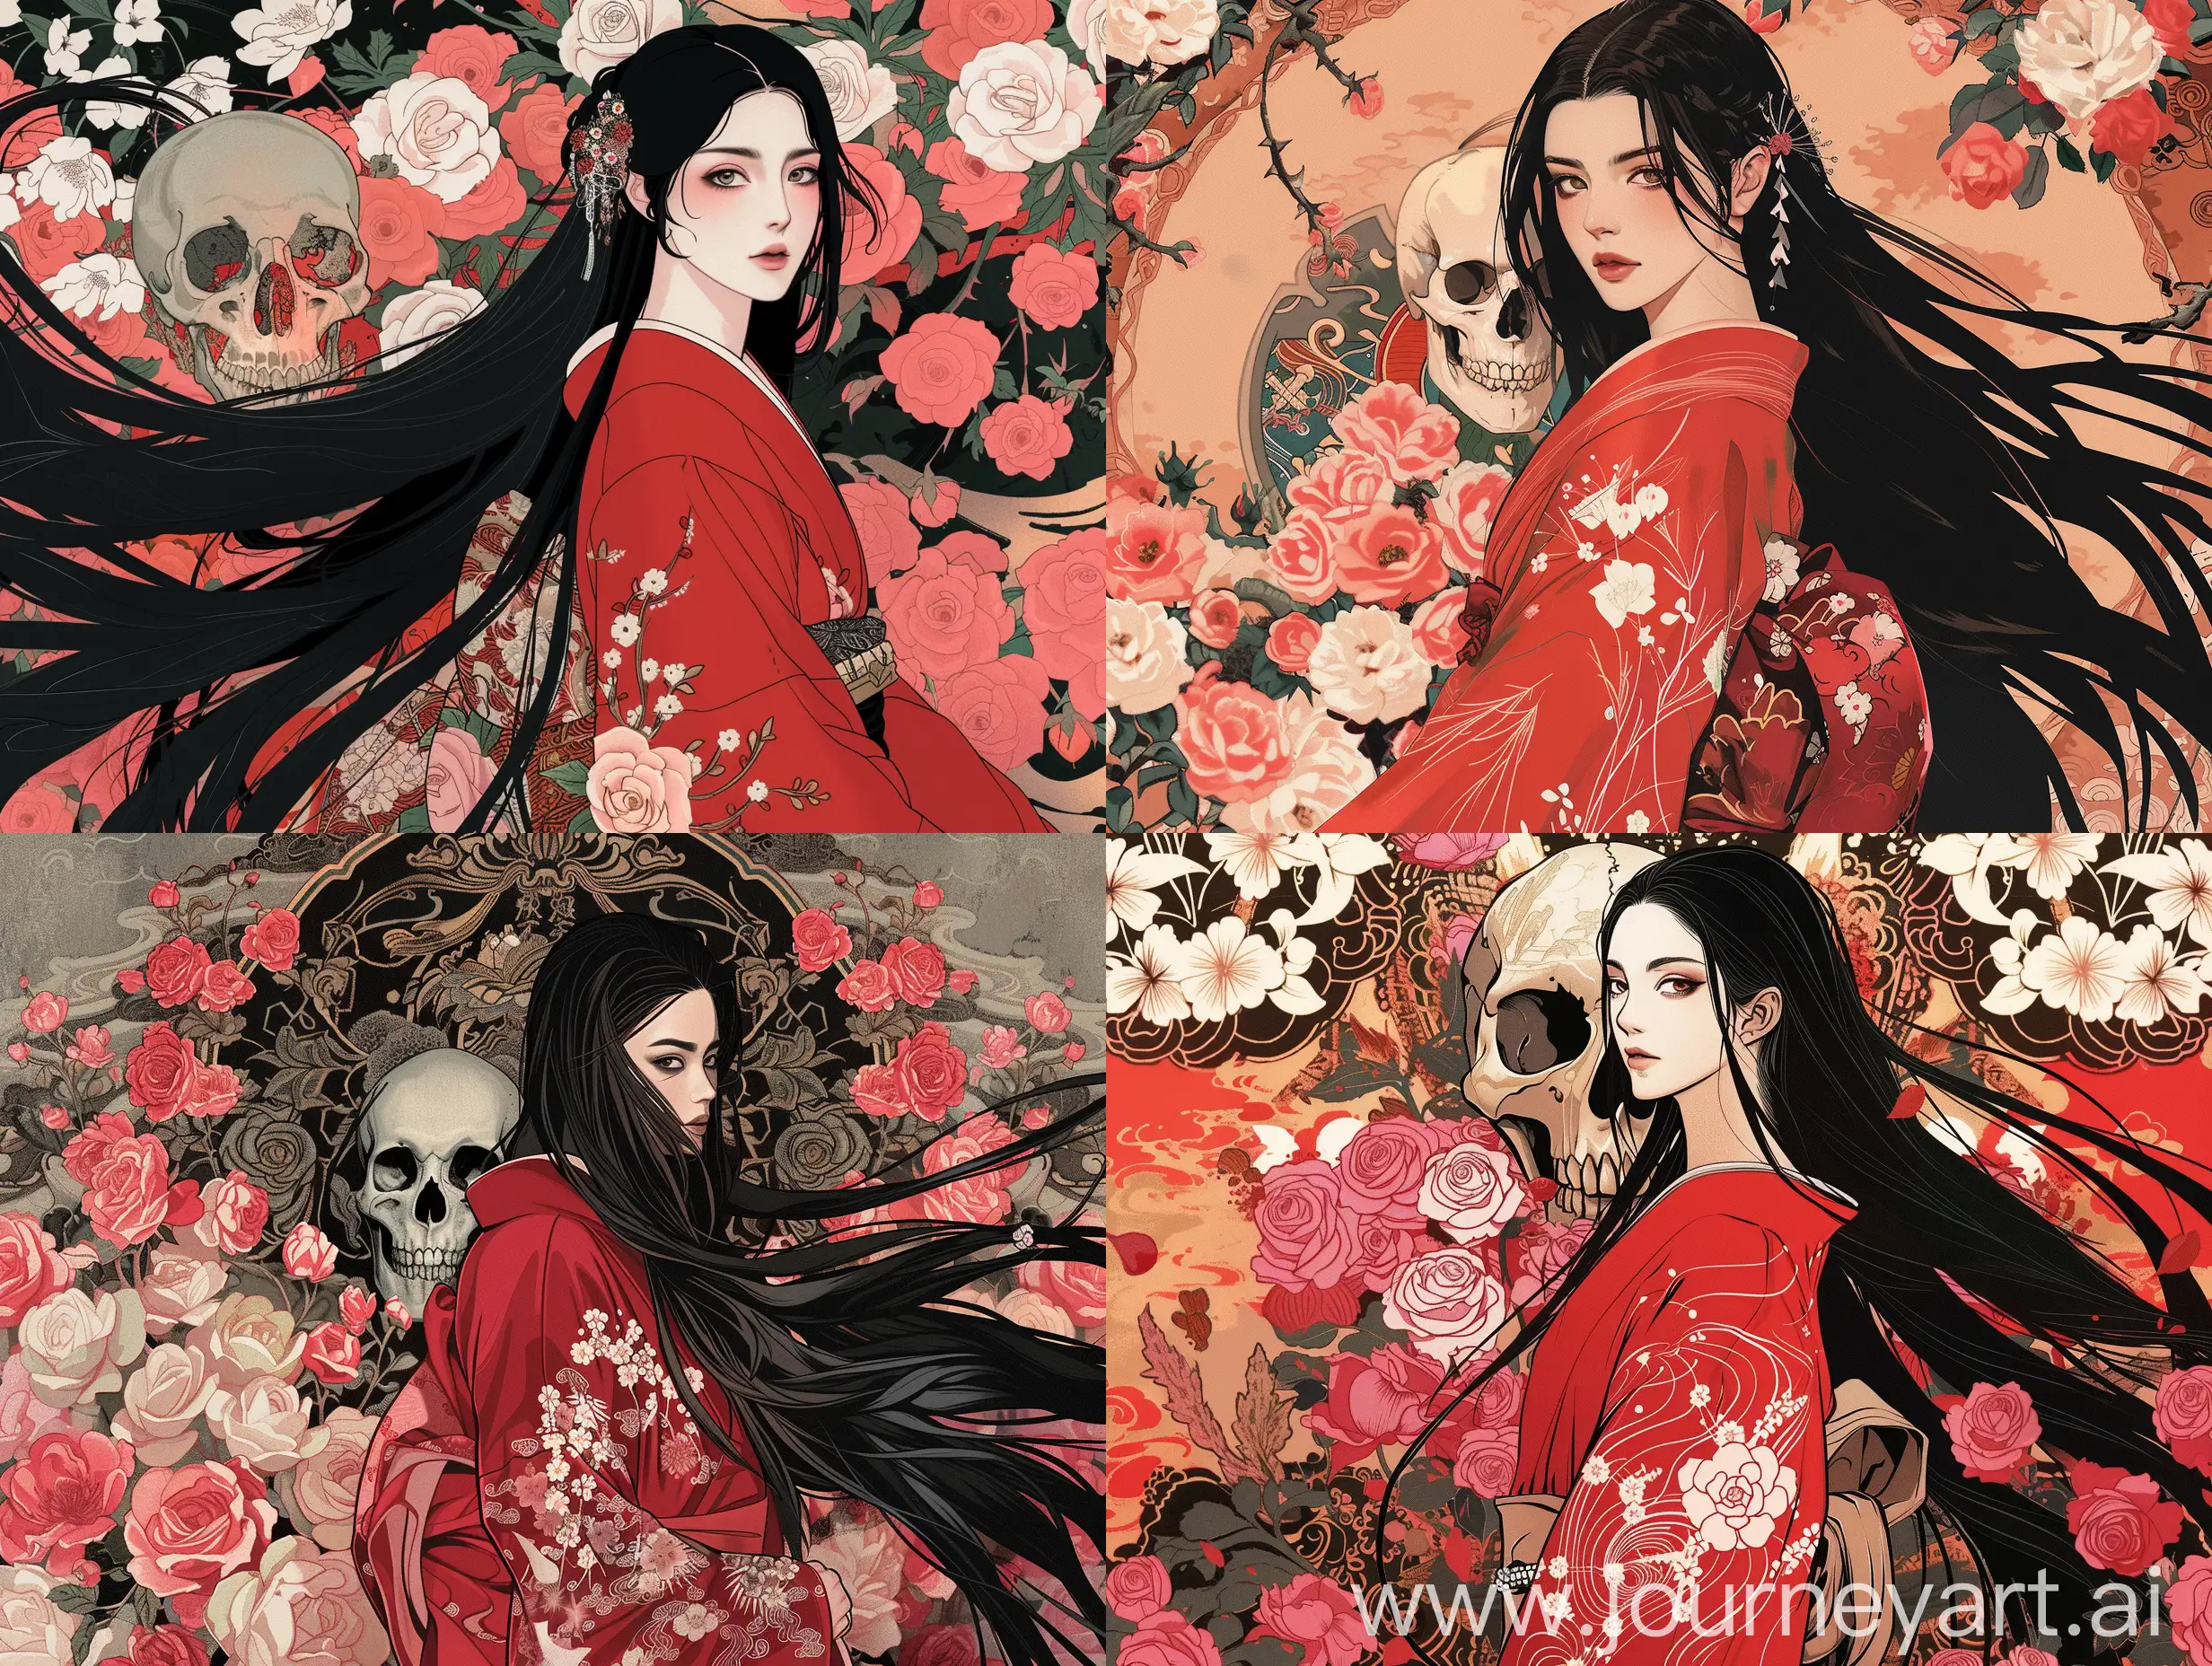 An illustration that marries traditional Japanese aesthetics with modern digital artistry, capturing the essence of the Edo period while infusing contemporary flair. The central figure is a beautiful, serene, and mysterious Japanese woman with flowing long black hair, arrayed in a striking red kimono adorned with delicate white and pink flowers. She stands poised in front of an ornate backdrop that features a contrastingly macabre yet elegant skull surrounded by a bed of pink roses. Her expression is enigmatic, and her eye is watchful, hinting at a story untold. The colors should be rich and deep, with particular attention to the interplay of light and shadow, creating a vibrant yet harmonious composition that feels both timeless and avant-garde.